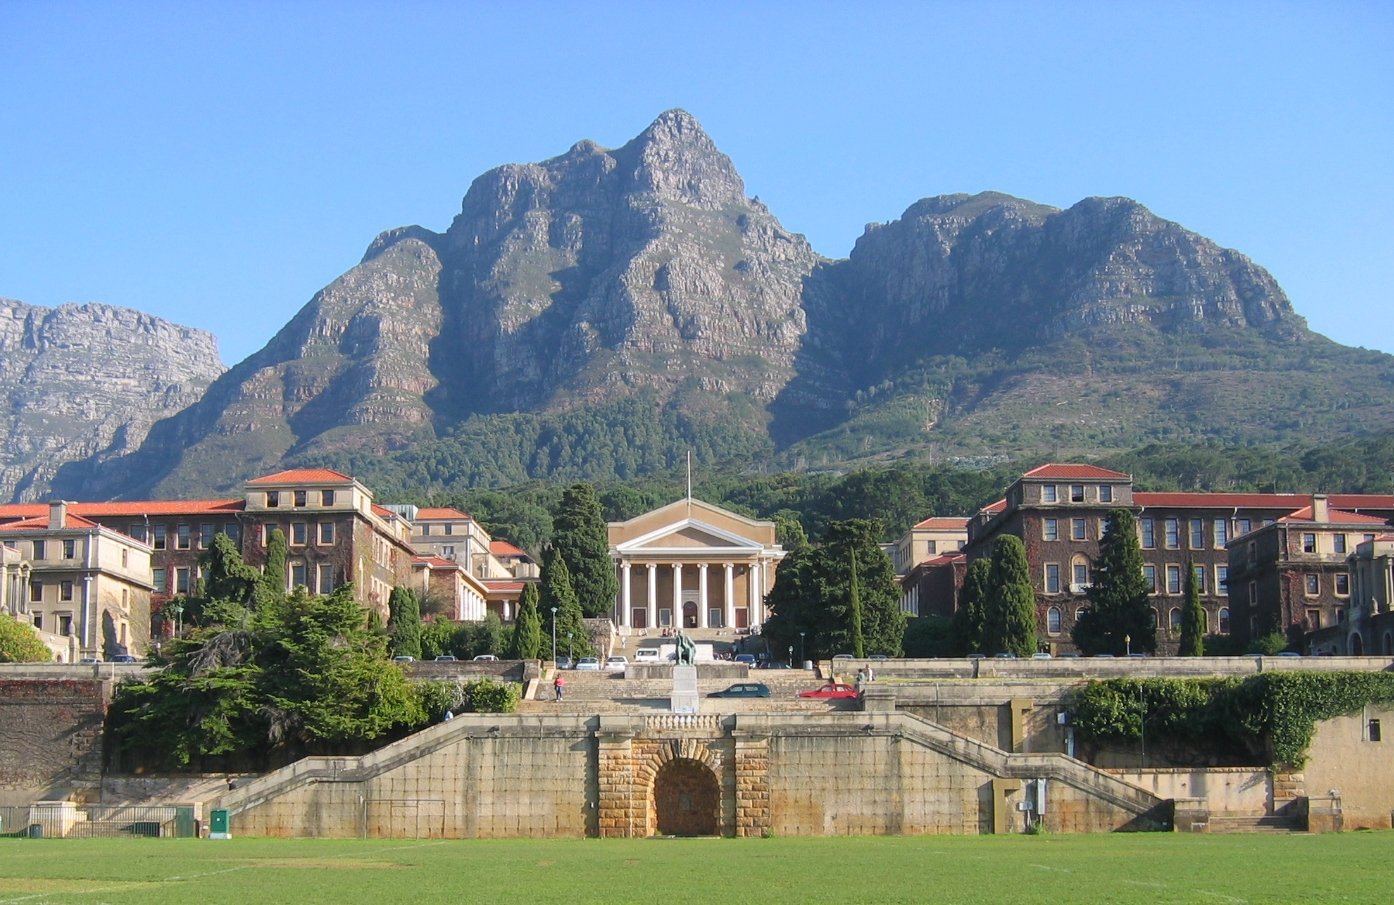 University of Cape Town, Cape Town, Table Mountain, South Africa Wallpaper